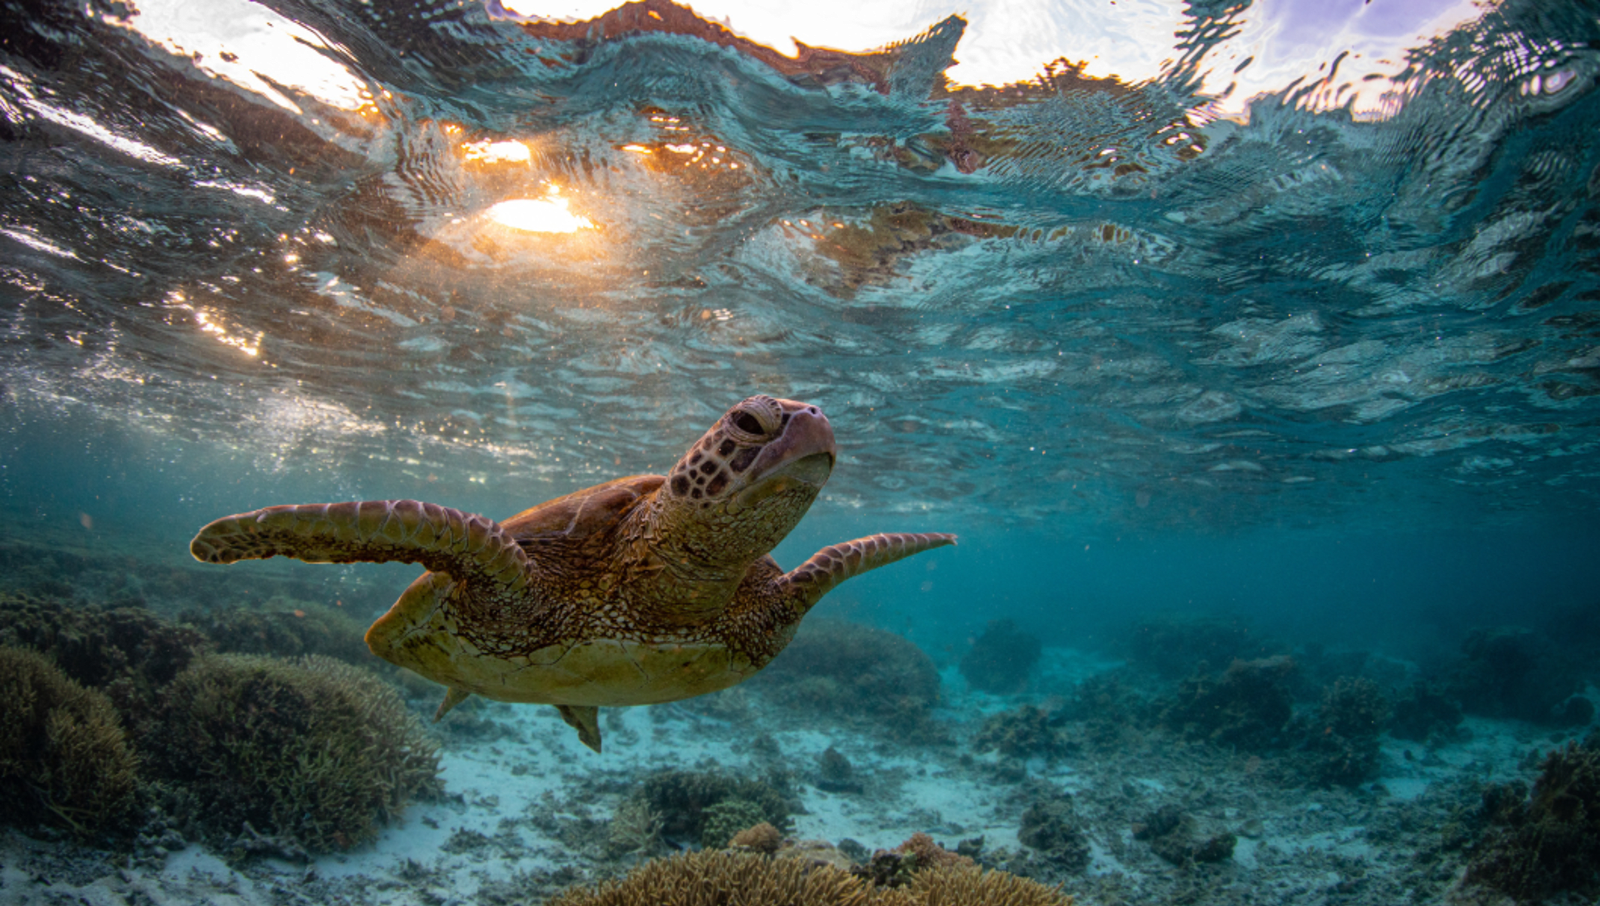 Turtle swimming underwater in the Great Barrier Reef.